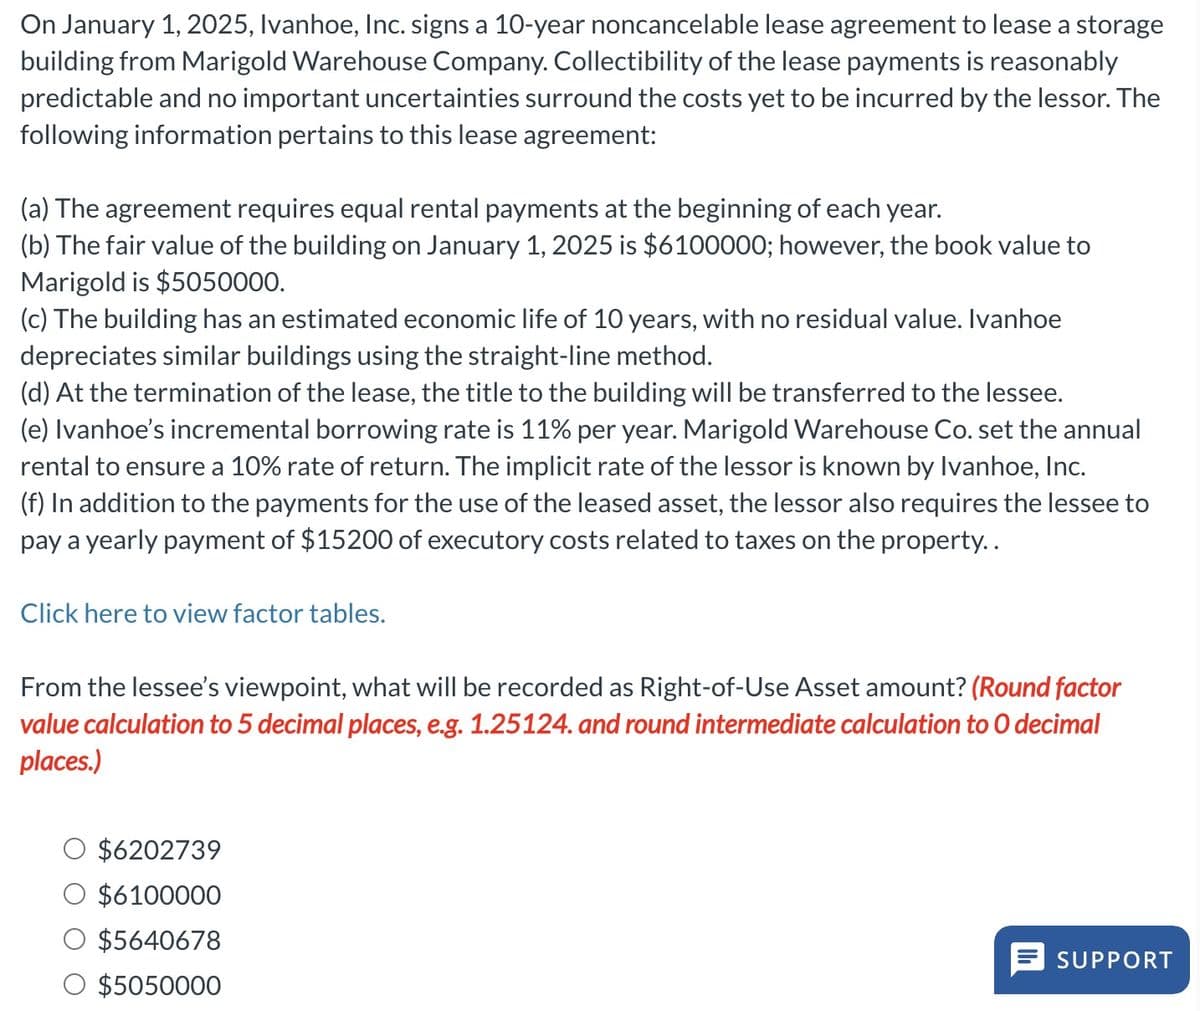 On January 1, 2025, Ivanhoe, Inc. signs a 10-year noncancelable lease agreement to lease a storage
building from Marigold Warehouse Company. Collectibility of the lease payments is reasonably
predictable and no important uncertainties surround the costs yet to be incurred by the lessor. The
following information pertains to this lease agreement:
(a) The agreement requires equal rental payments at the beginning of each year.
(b) The fair value of the building on January 1, 2025 is $6100000; however, the book value to
Marigold is $5050000.
(c) The building has an estimated economic life of 10 years, with no residual value. Ivanhoe
depreciates similar buildings using the straight-line method.
(d) At the termination of the lease, the title to the building will be transferred to the lessee.
(e) Ivanhoe's incremental borrowing rate is 11% per year. Marigold Warehouse Co. set the annual
rental to ensure a 10% rate of return. The implicit rate of the lessor is known by Ivanhoe, Inc.
(f) In addition to the payments for the use of the leased asset, the lessor also requires the lessee to
pay a yearly payment of $15200 of executory costs related to taxes on the property..
Click here to view factor tables.
From the lessee's viewpoint, what will be recorded as Right-of-Use Asset amount? (Round factor
value calculation to 5 decimal places, e.g. 1.25124. and round intermediate calculation to O decimal
places.)
$6202739
$6100000
$5640678
$5050000
SUPPORT